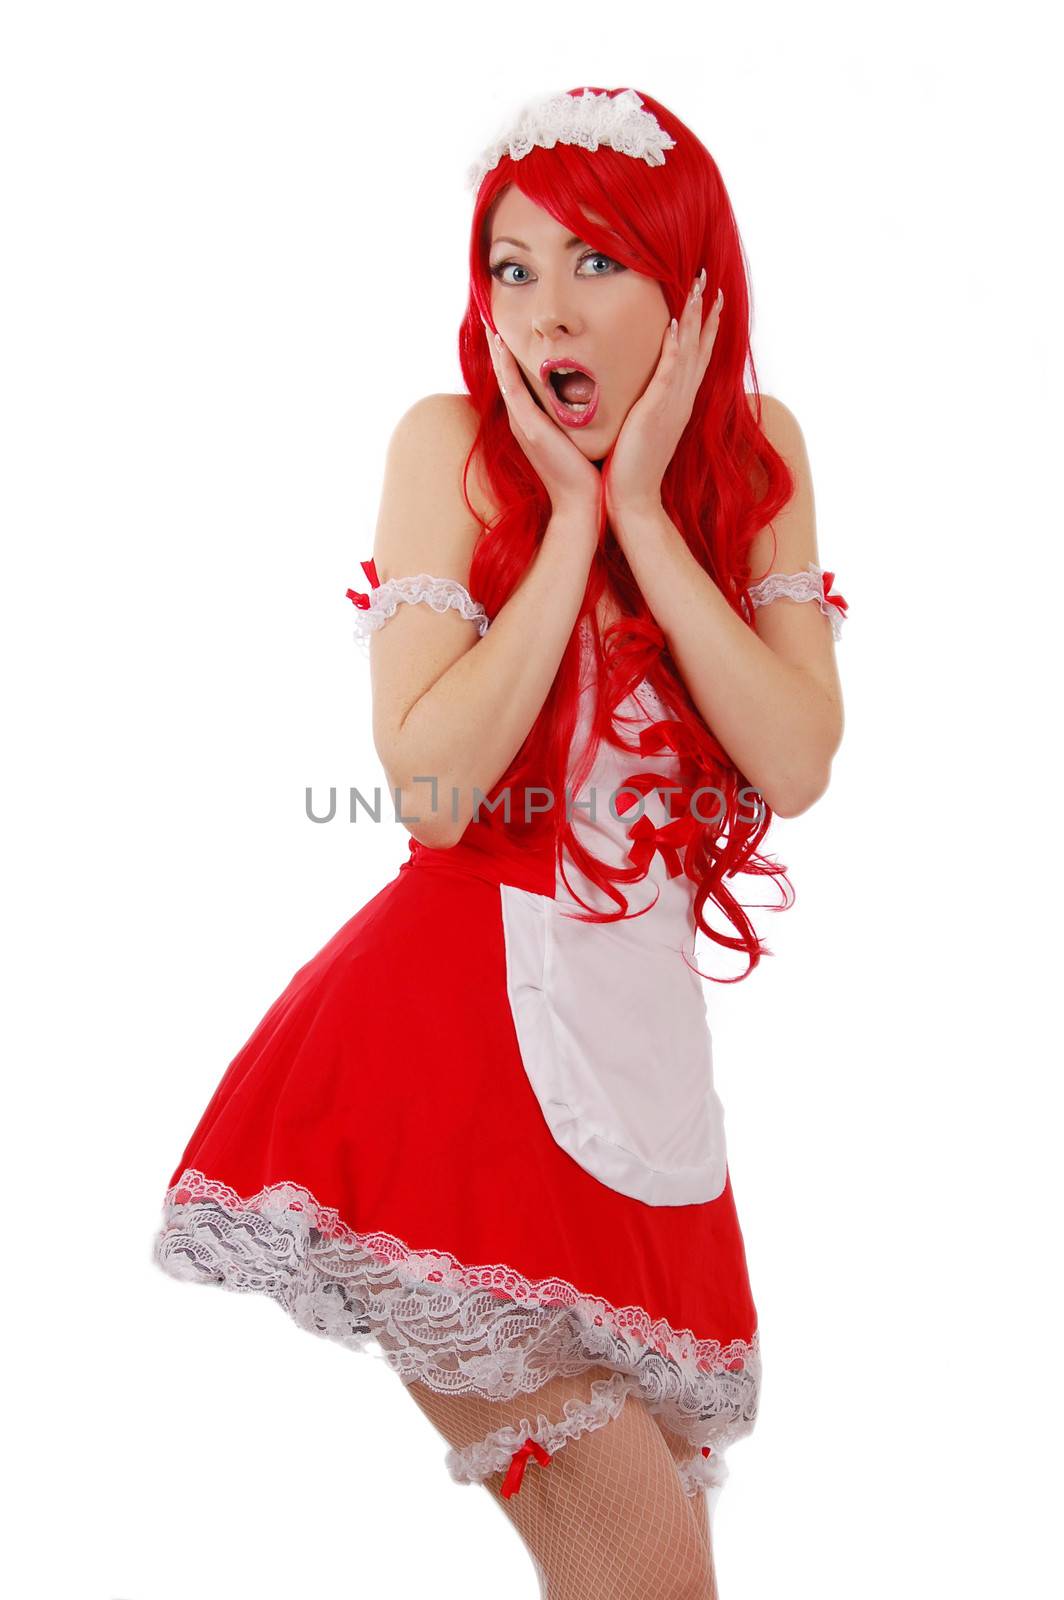 Seductive red-headed servant girl with shocked face over white